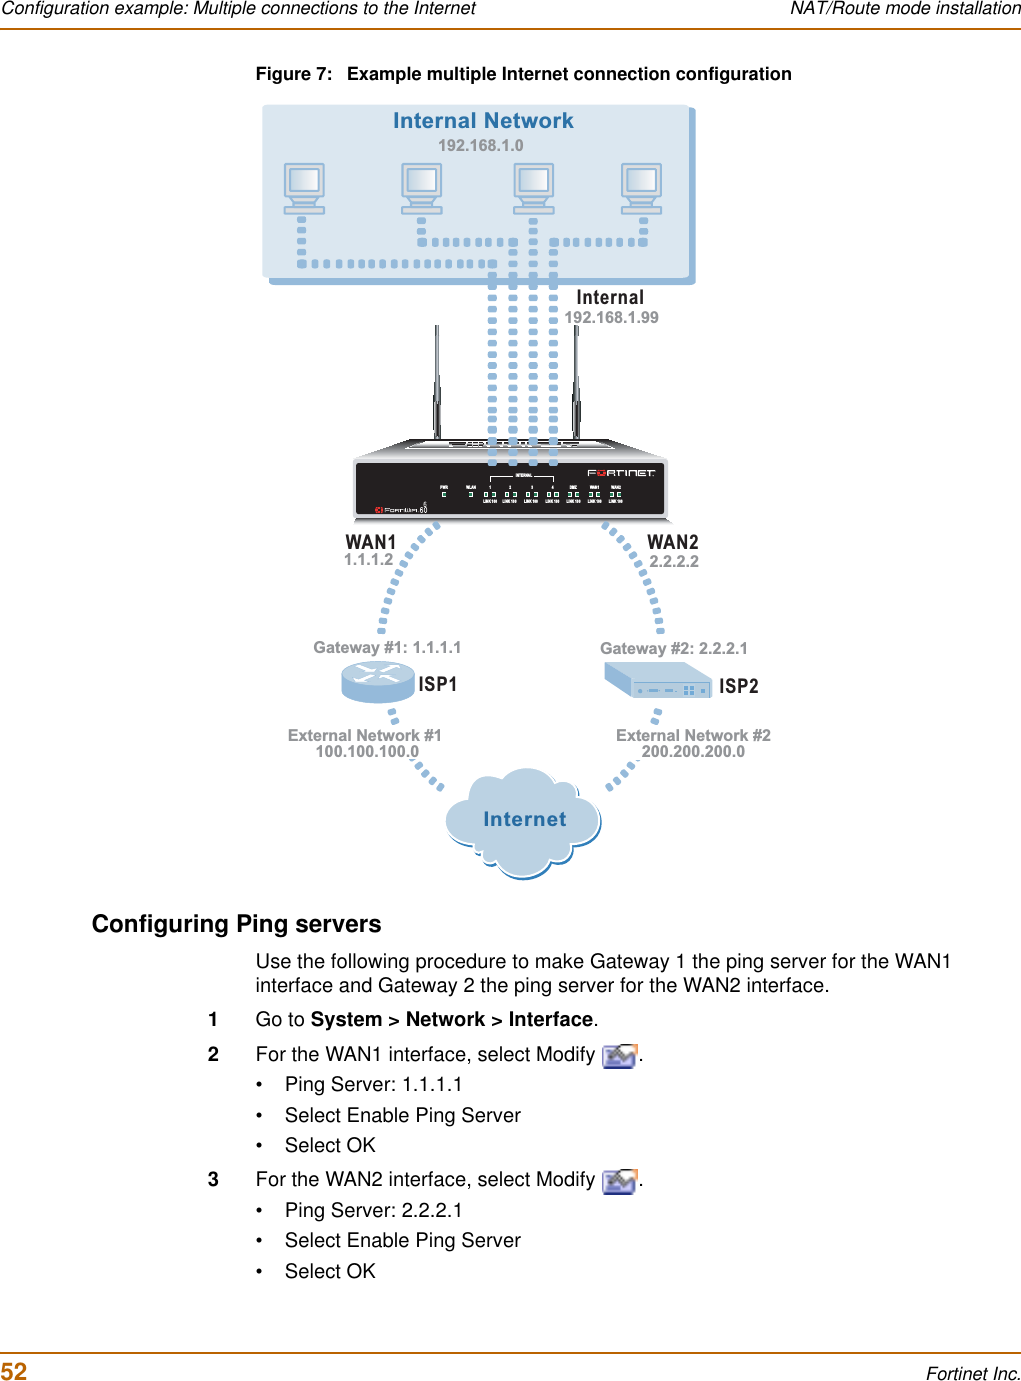 52 Fortinet Inc.Configuration example: Multiple connections to the Internet NAT/Route mode installationFigure 7: Example multiple Internet connection configurationConfiguring Ping serversUse the following procedure to make Gateway 1 the ping server for the WAN1 interface and Gateway 2 the ping server for the WAN2 interface.1Go to System &gt; Network &gt; Interface.2For the WAN1 interface, select Modify  .• Ping Server: 1.1.1.1• Select Enable Ping Server•Select OK3For the WAN2 interface, select Modify  .• Ping Server: 2.2.2.1• Select Enable Ping Server•Select OKINTERNALDMZ4321LINK 100 LINK 100 LINK 100 LINK 100 LINK 100 LINK 100 LINK 100WAN1 WAN2PWR WLANInternal NetworkWAN2WAN1InternalInternetExternal Network #1 100.100.100.0External Network #2200.200.200.0Gateway #1: 1.1.1.1 Gateway #2: 2.2.2.1ISP1 ISP22.2.2.21.1.1.2192.168.1.99192.168.1.0